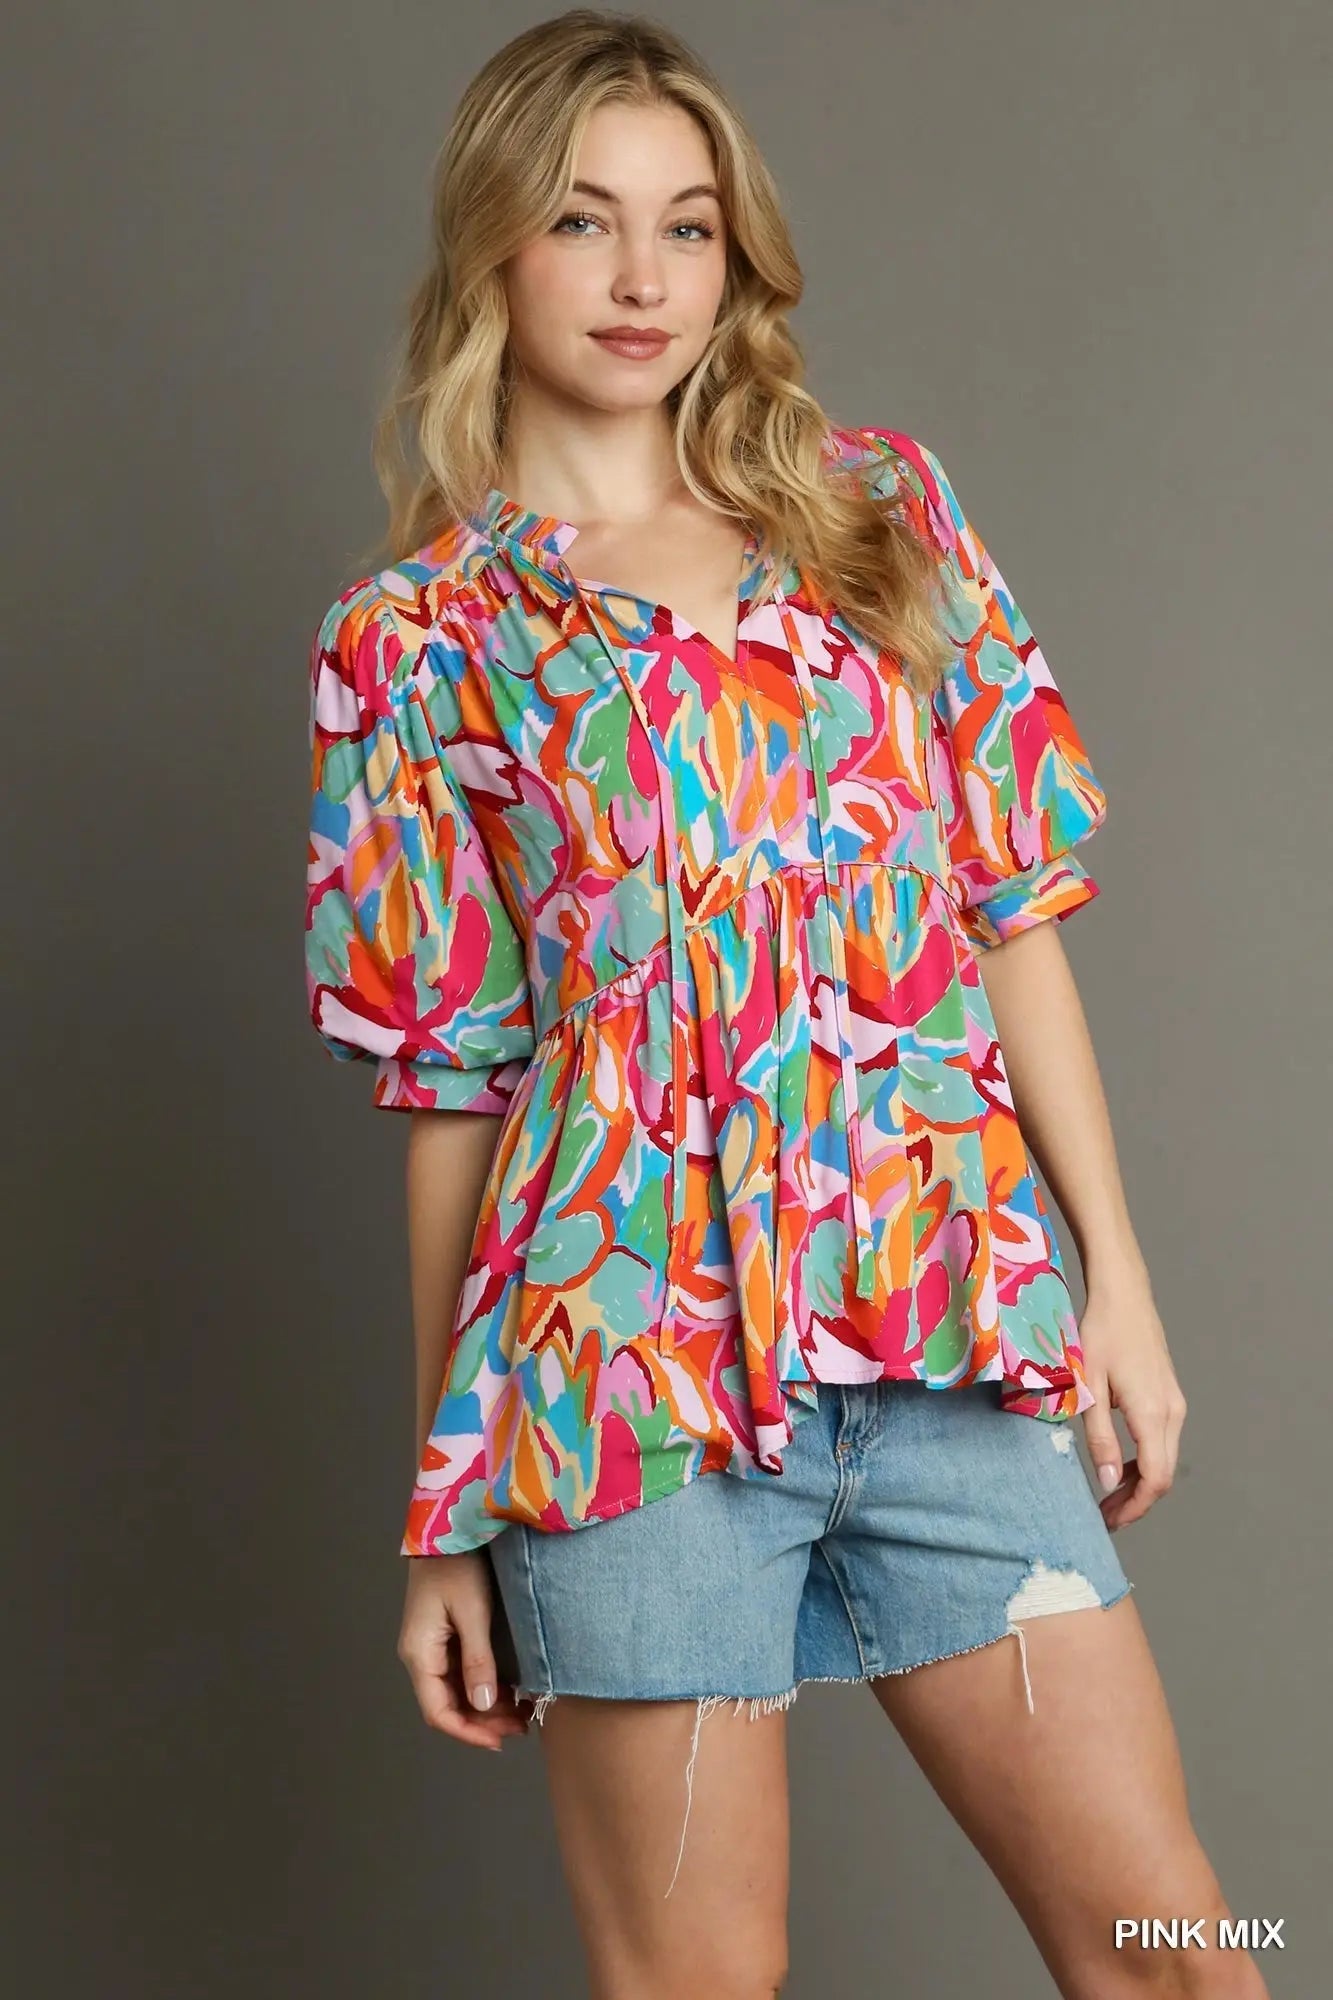 Abstract Print Baby Doll Top with Ruffle Split Neck with Front Tie & 3/4 Sleeves